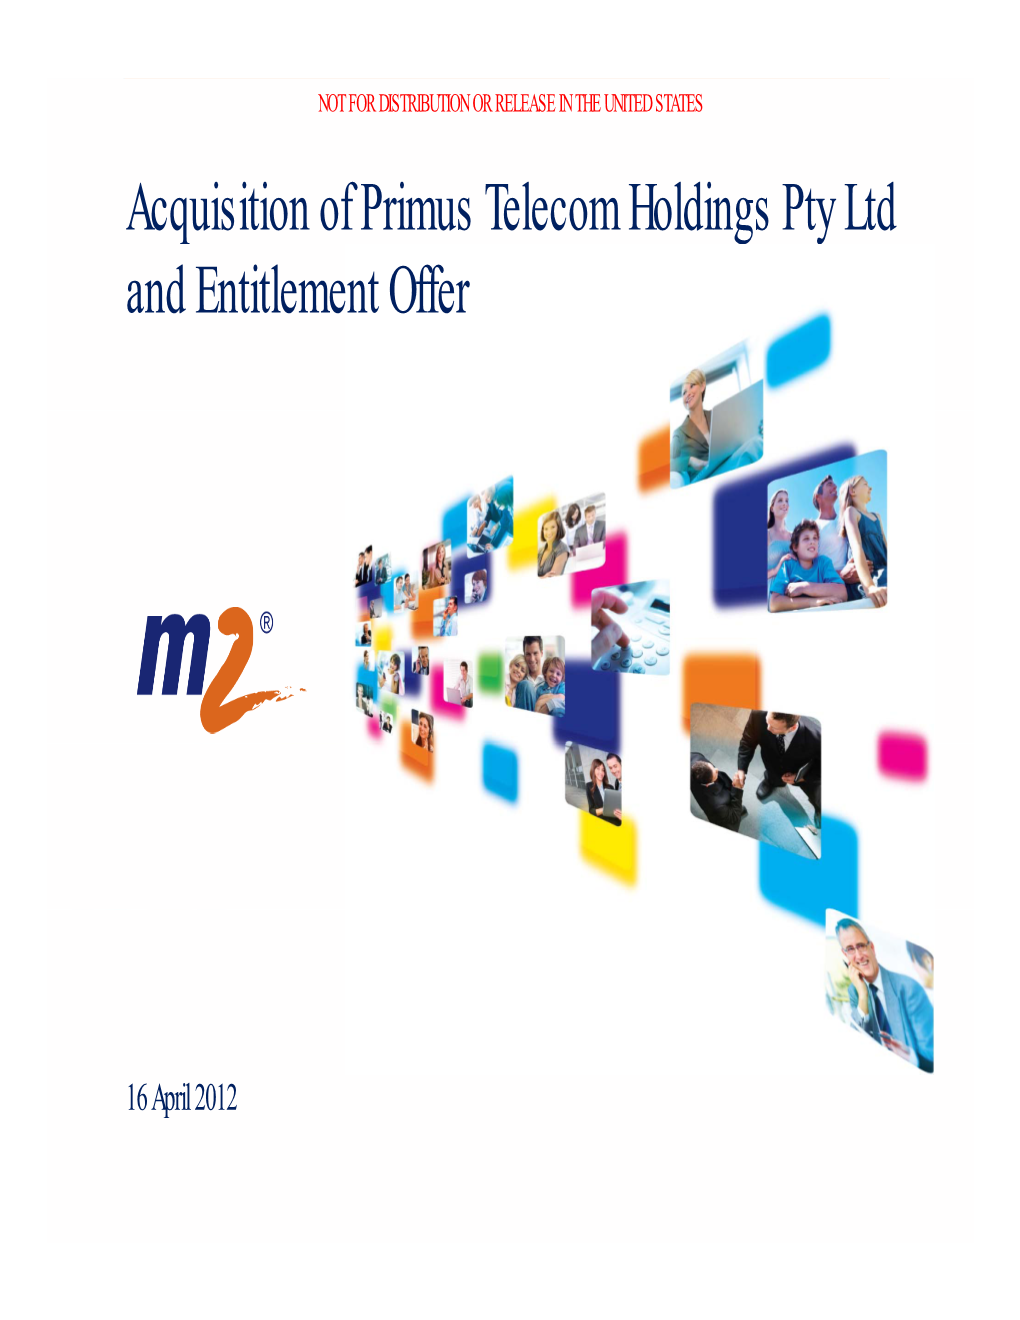 Acquisition of Primus Telecom Holdings Pty Ltd and Entitlement Offer